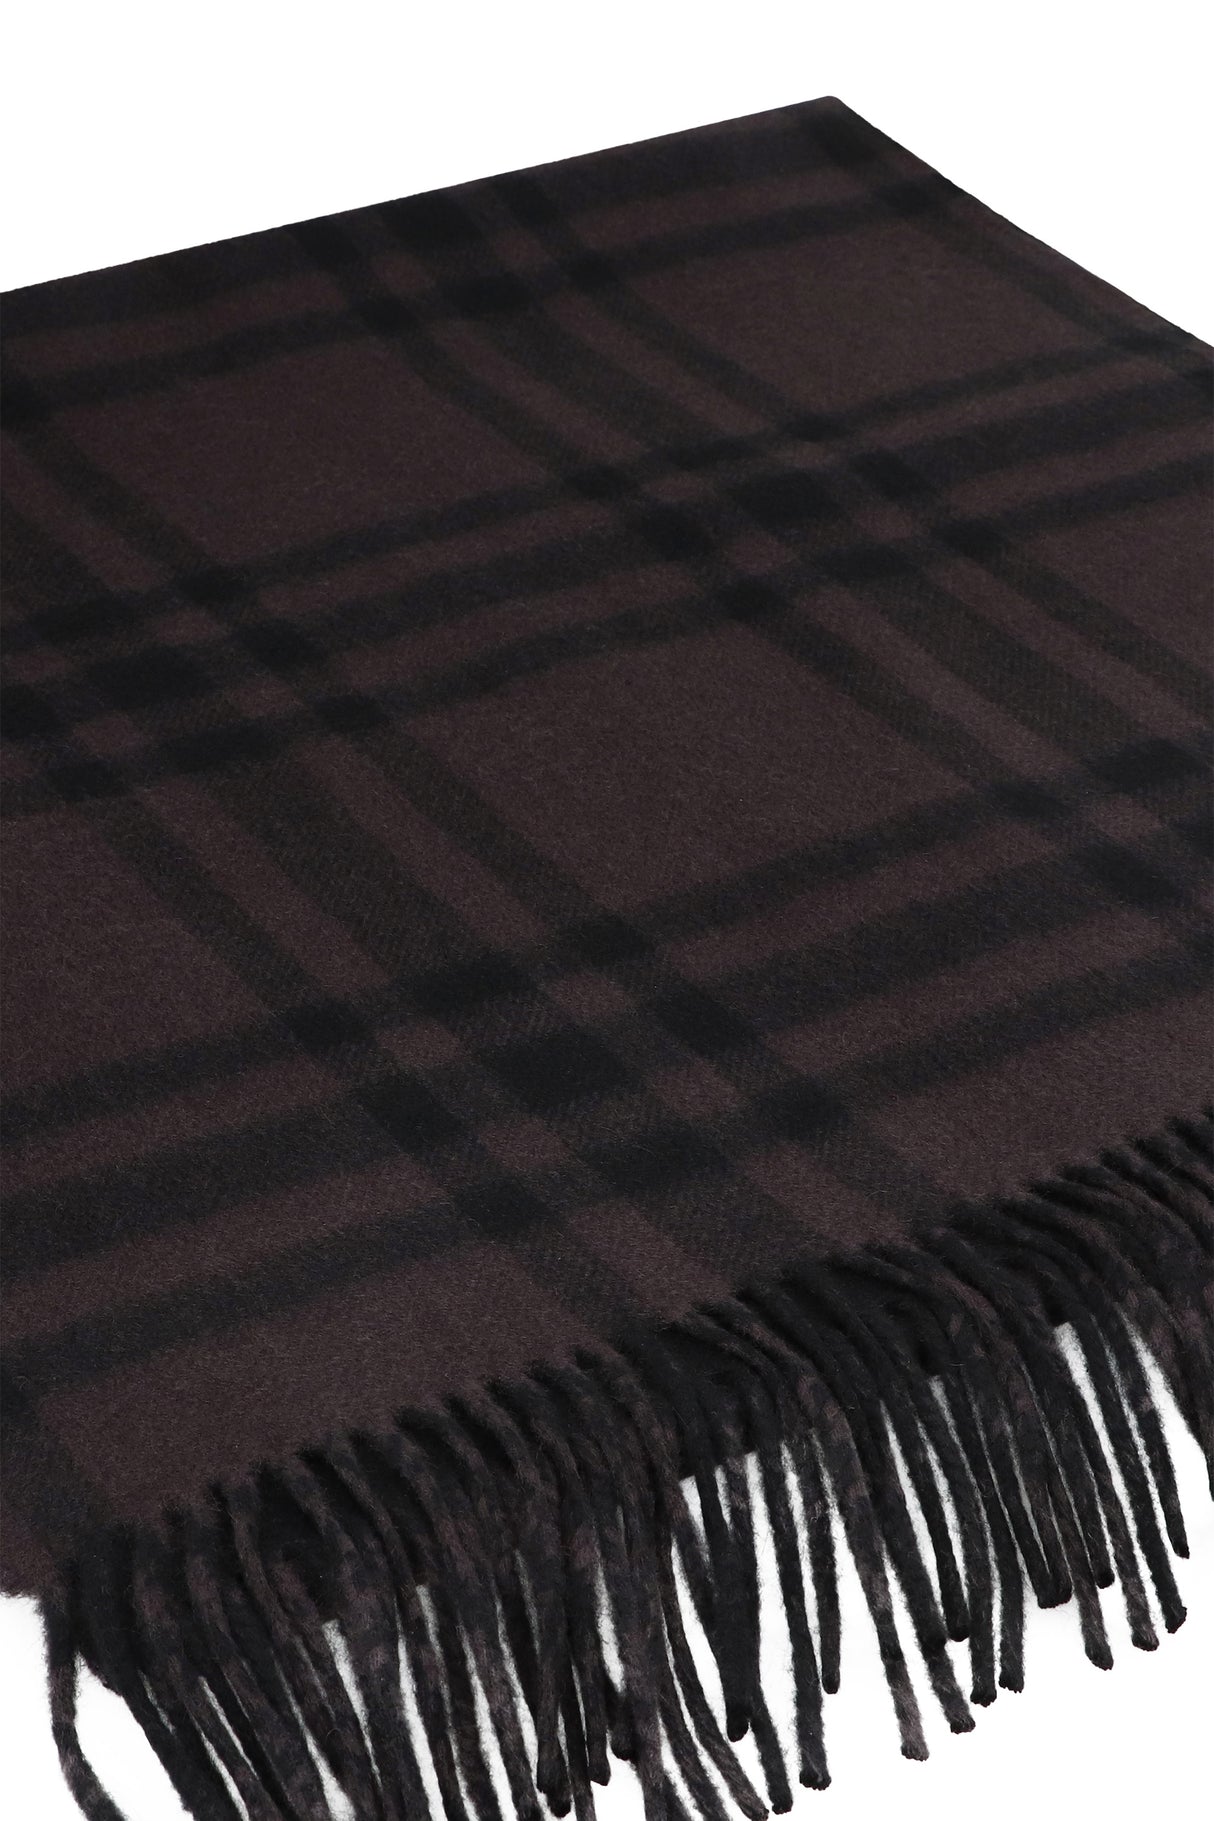 BURBERRY Luxurious Cashmere Scarf with Checkered Design and Fringed Hemline - 210x50 cm